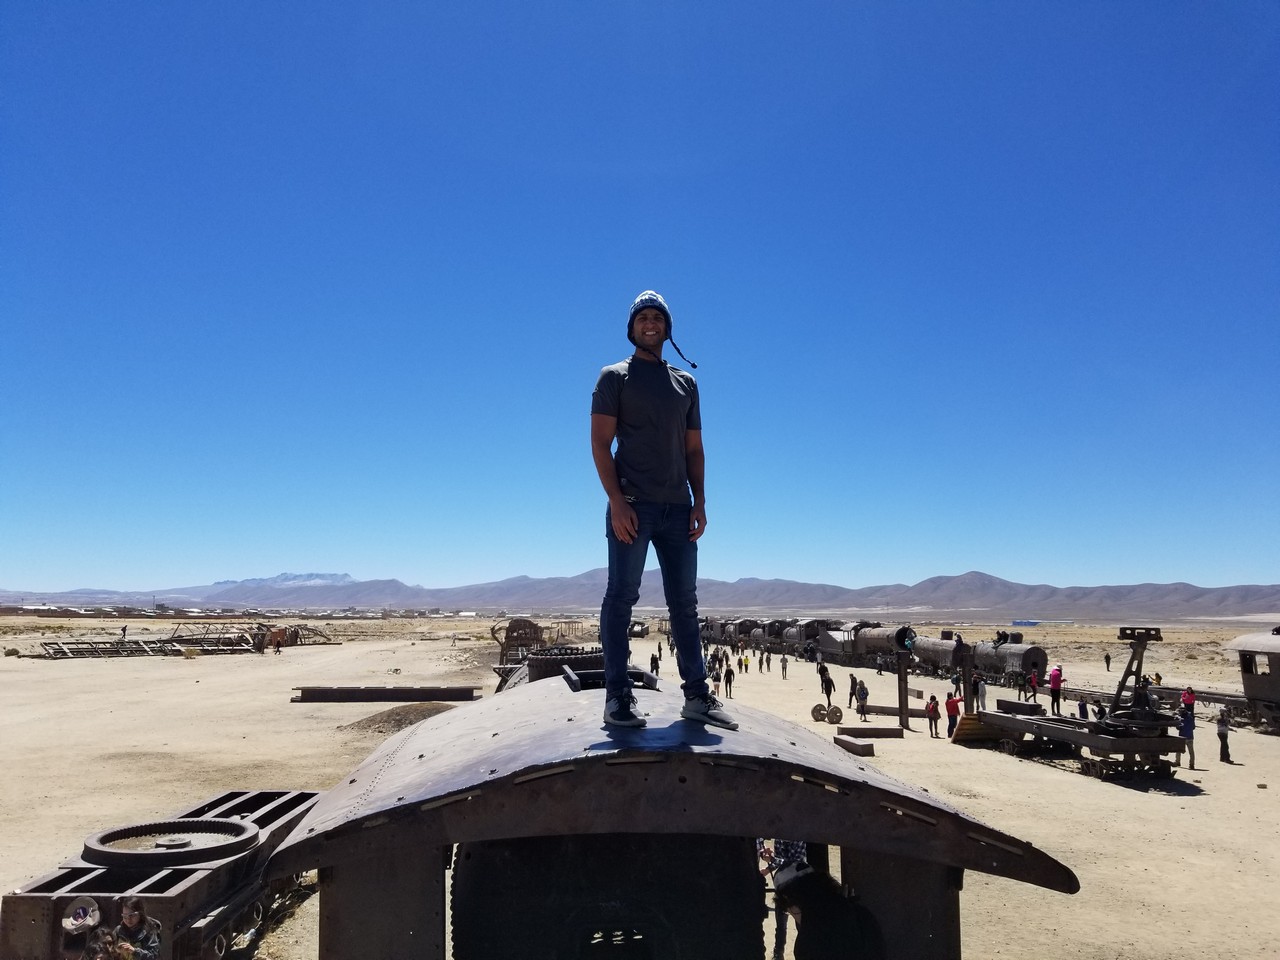 a man standing on top of a metal object in a desert